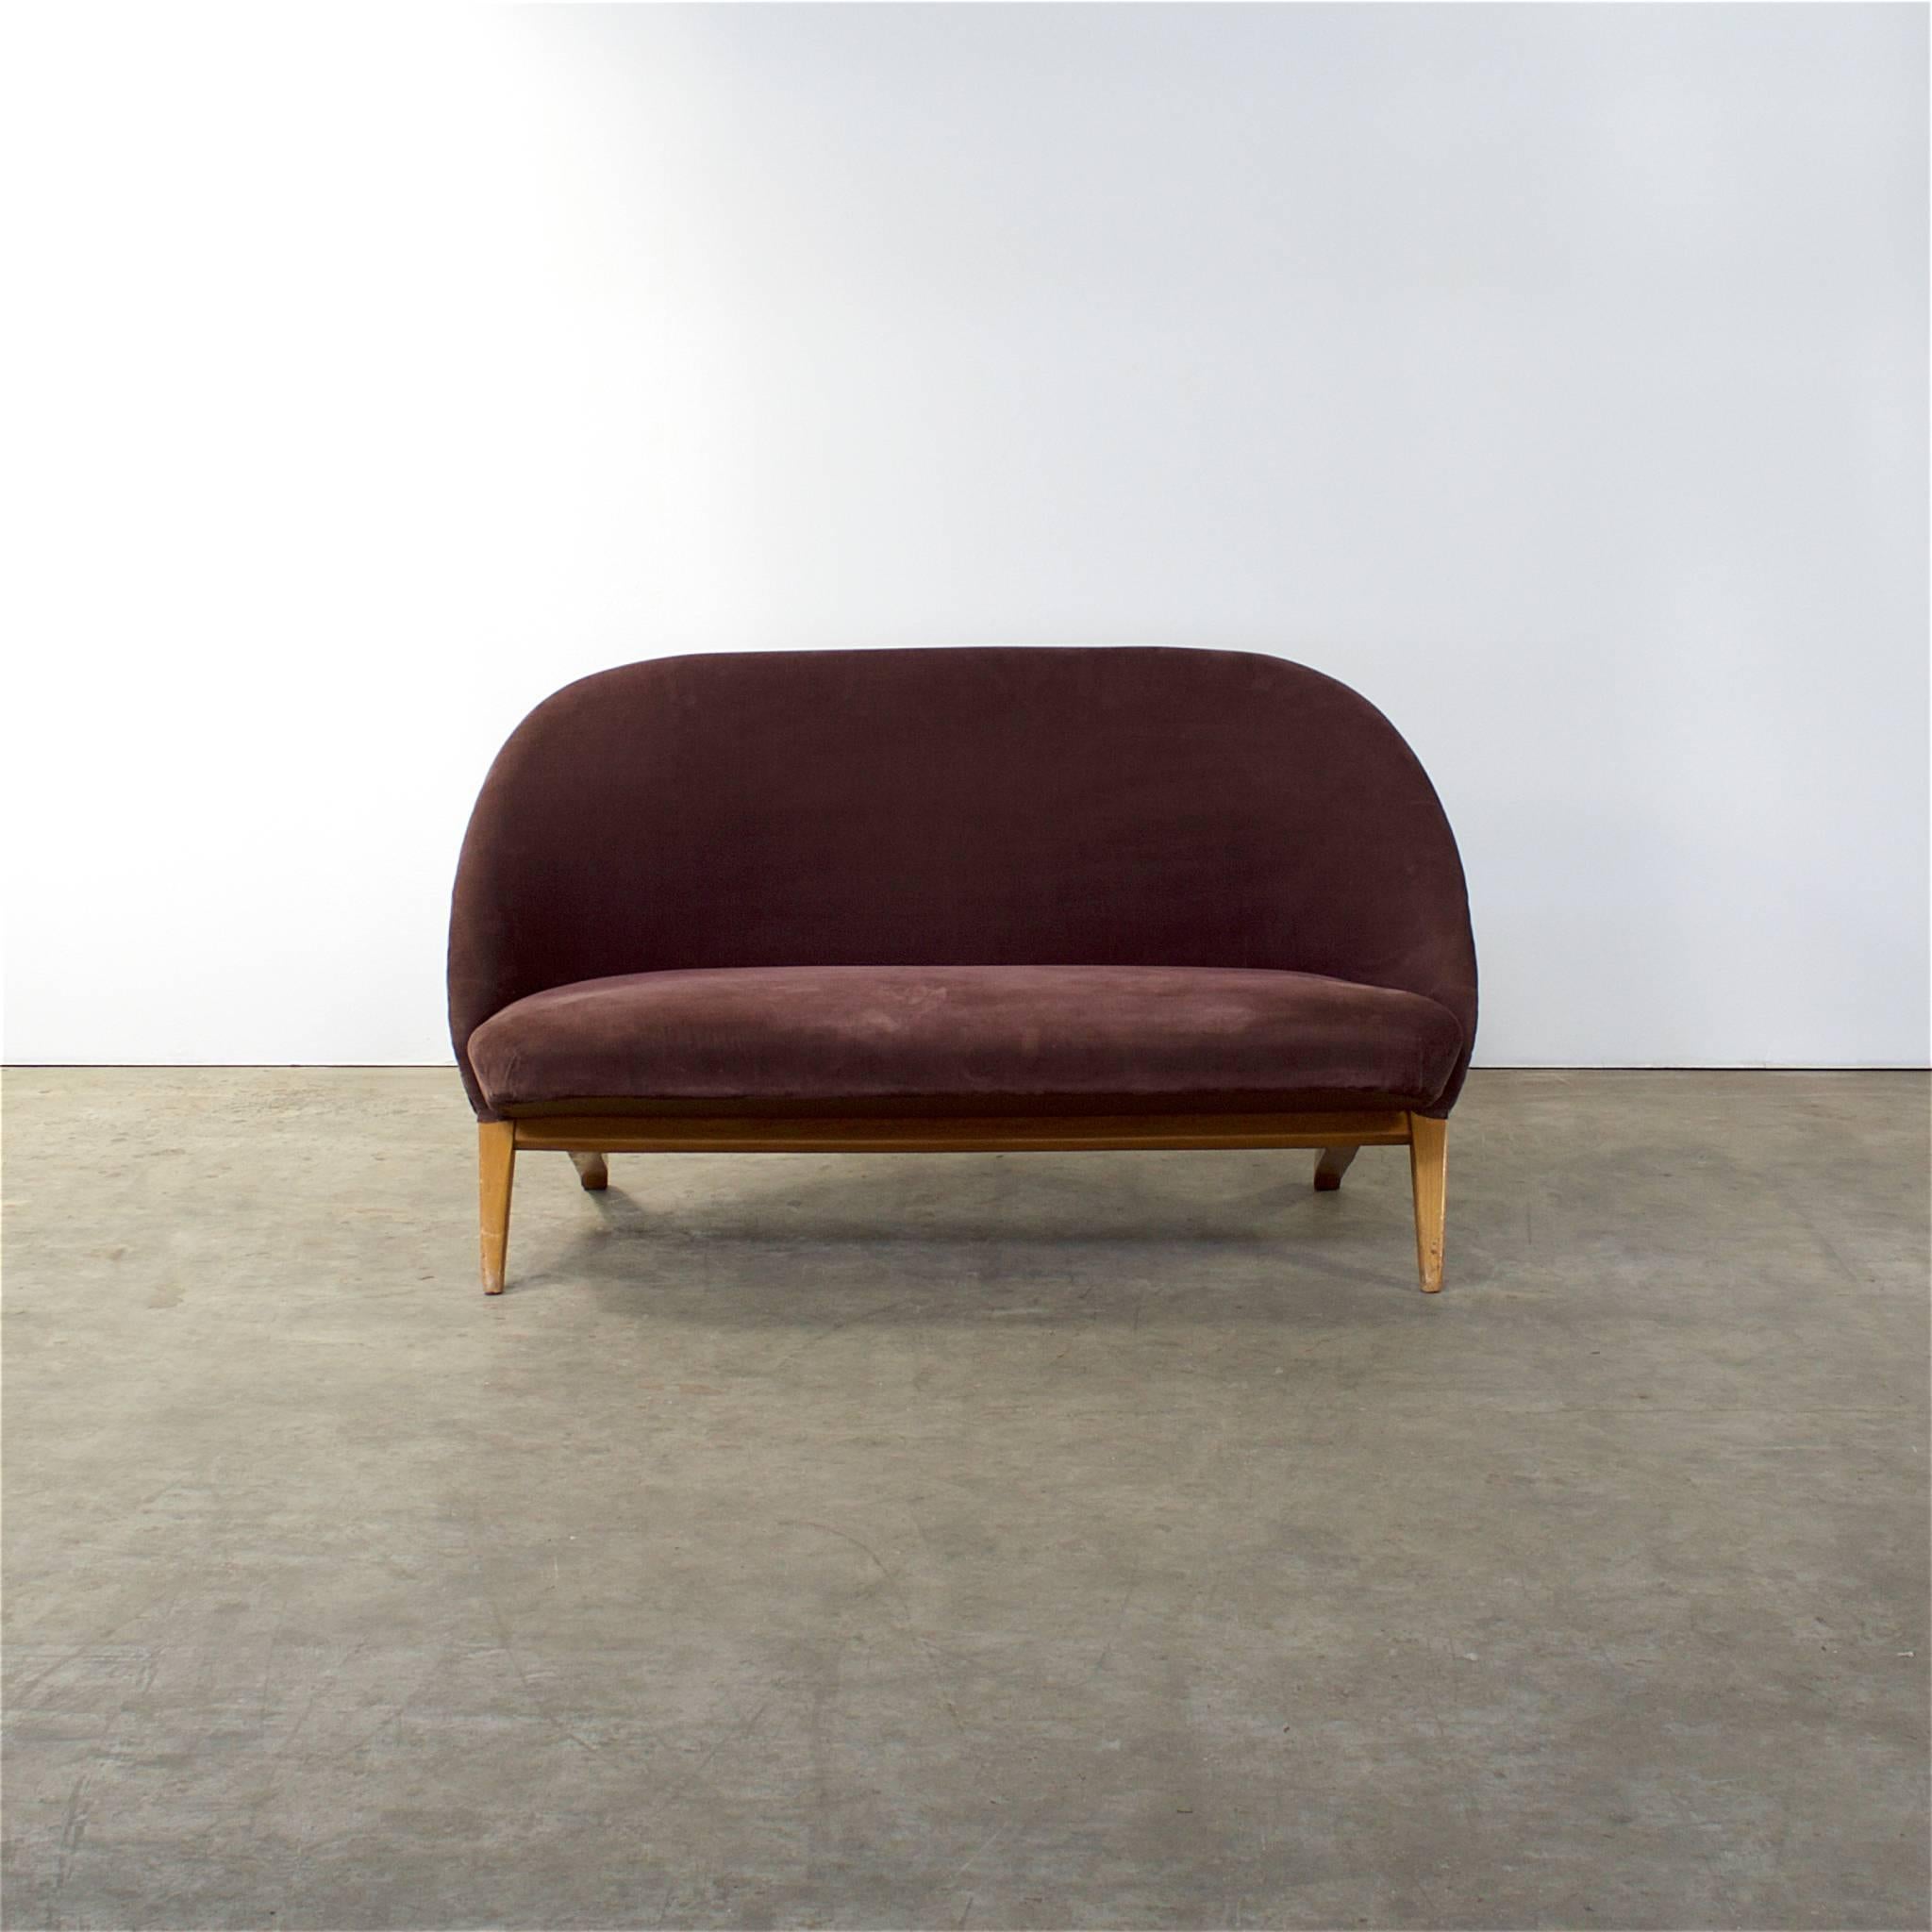 1950s Theo Ruth sofa “congo” for Artifort, Netherlands. Beautiful model sofa in brown fabric. Teak congo frame. Good condition with minor spurs of age and usage. Design classic sofa. Dimensions: 136cm (W) x 80cm (D) x 74cm (H), seat H 44cm.